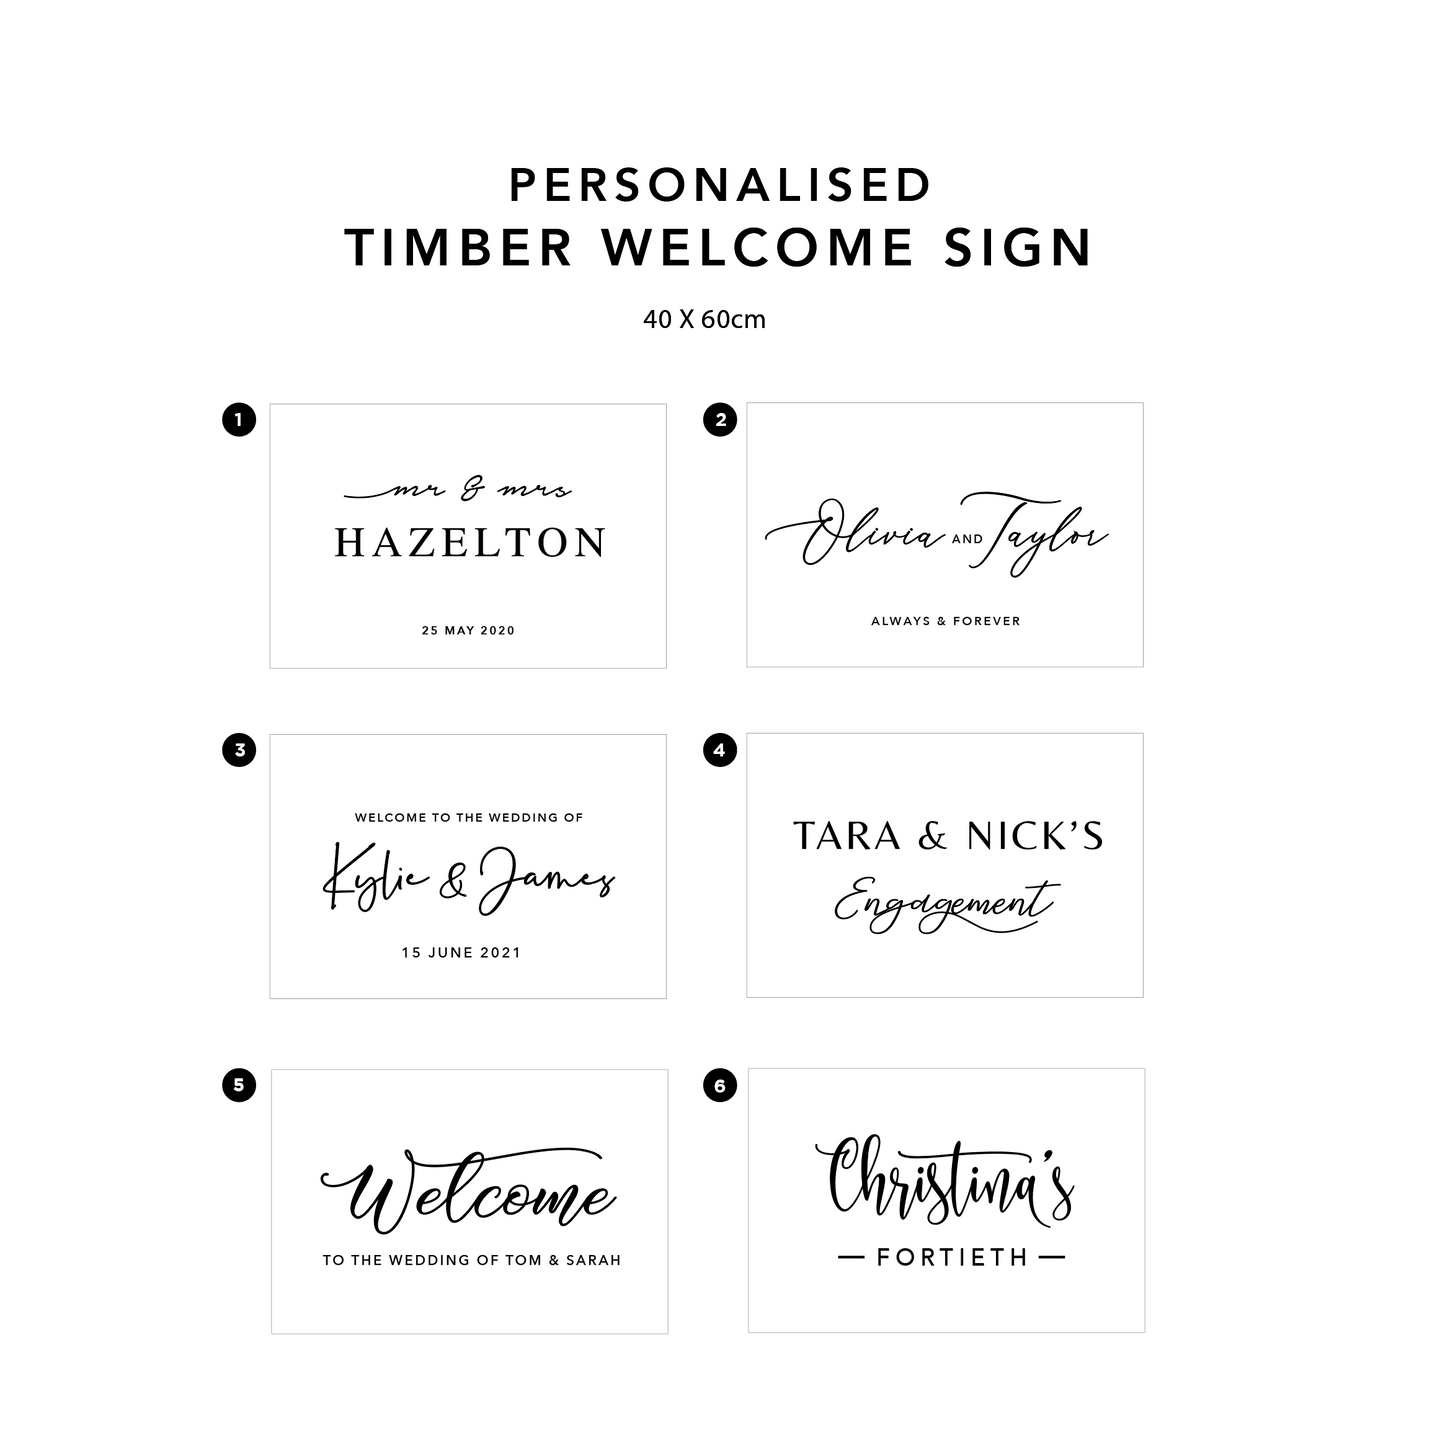 Personalised Timber Welcome Sign For Sale